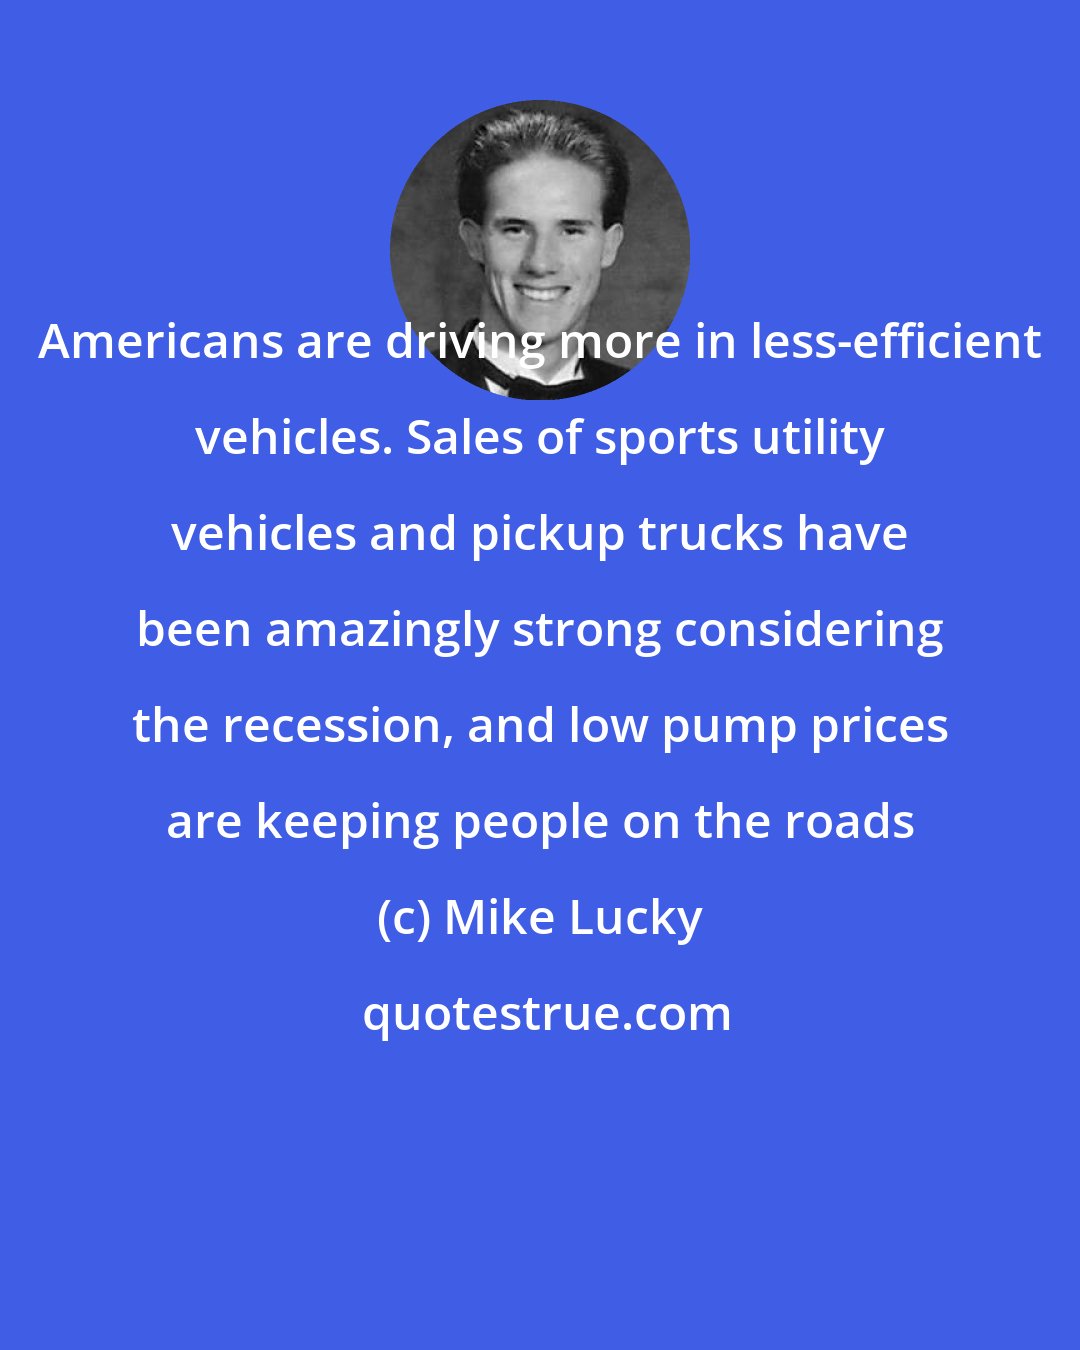 Mike Lucky: Americans are driving more in less-efficient vehicles. Sales of sports utility vehicles and pickup trucks have been amazingly strong considering the recession, and low pump prices are keeping people on the roads